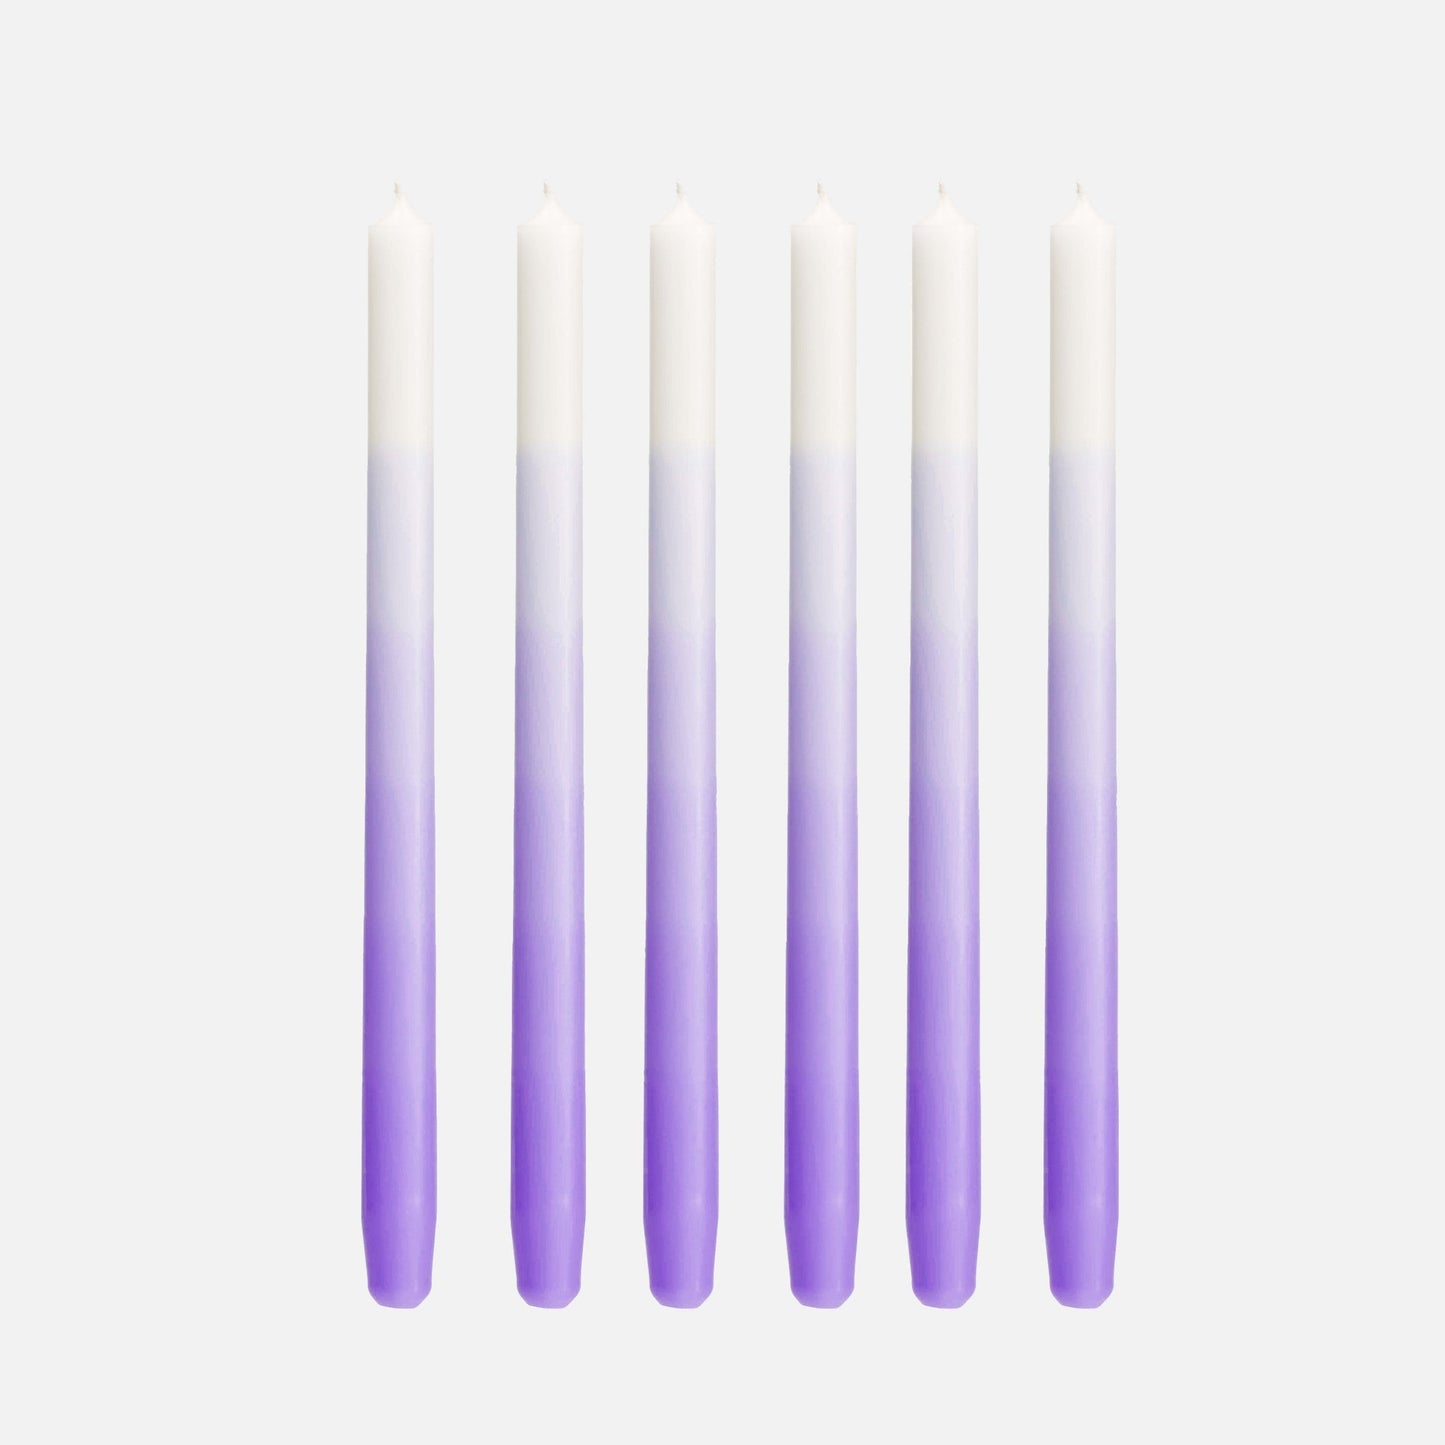 GRADIENT CANDLES | LOVELY LILAC (set of 6, in a gift box)